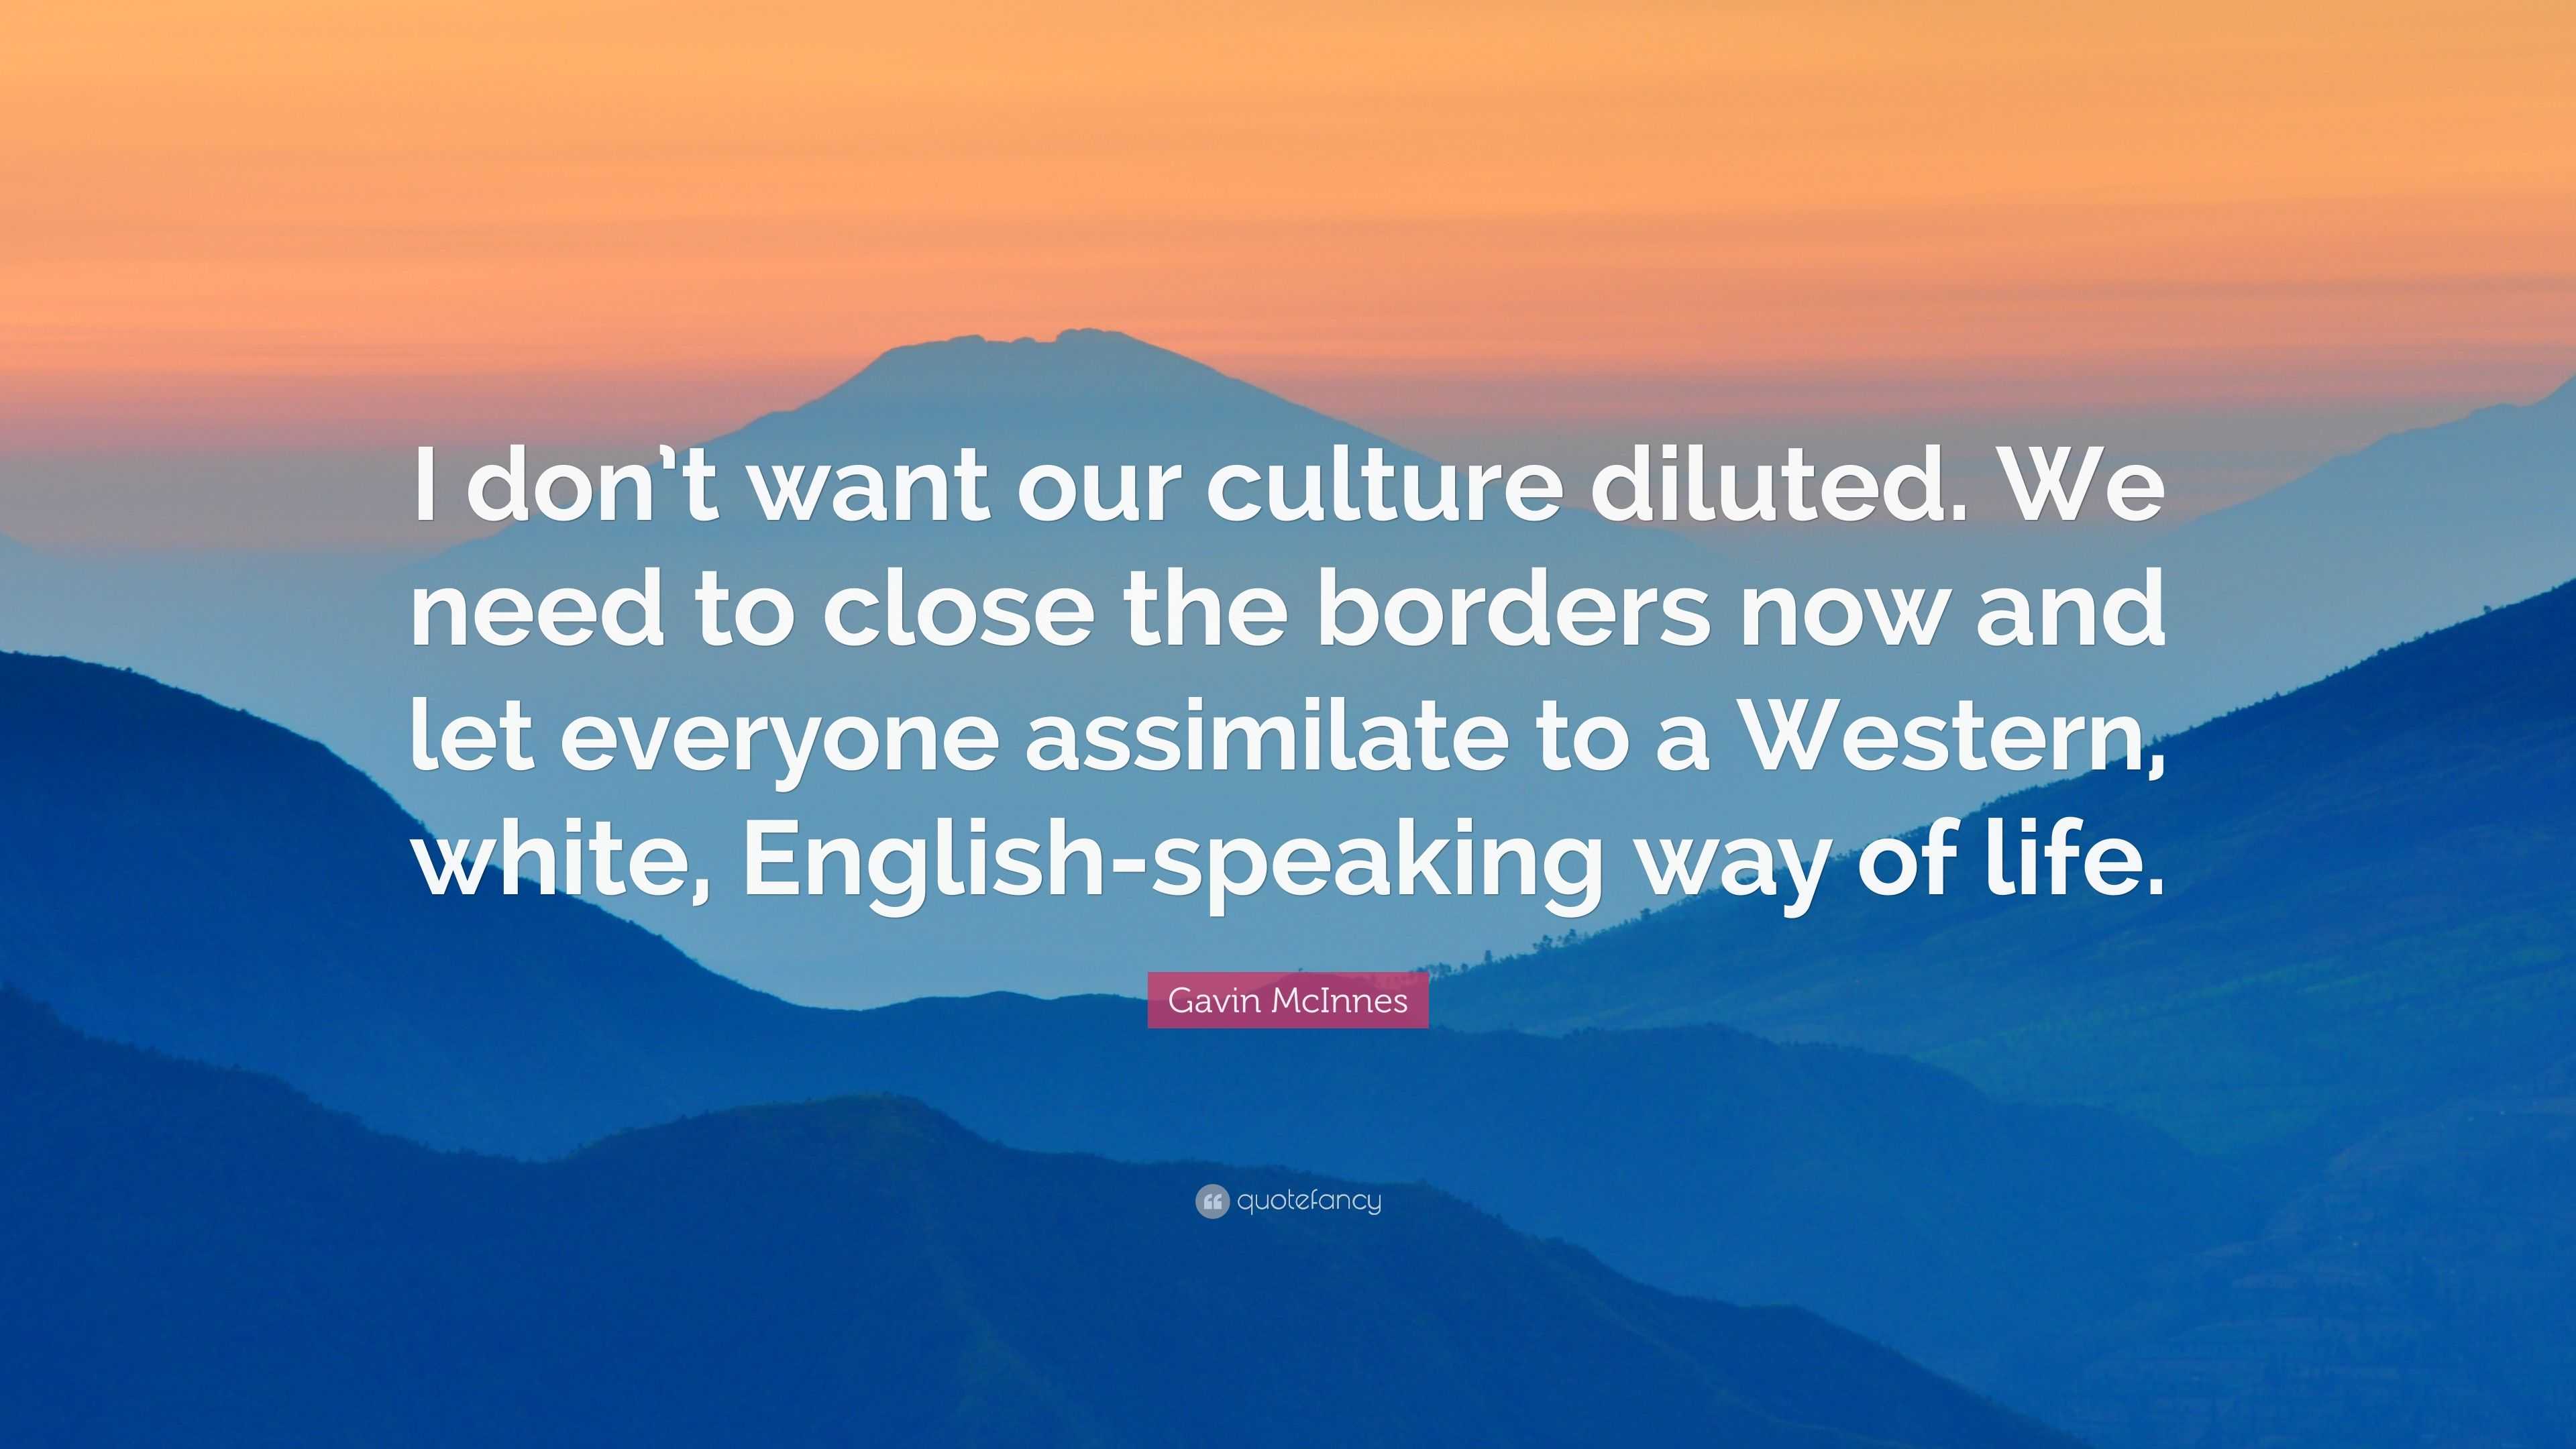 Gavin McInnes Quote: “I don’t want our culture diluted. We need to